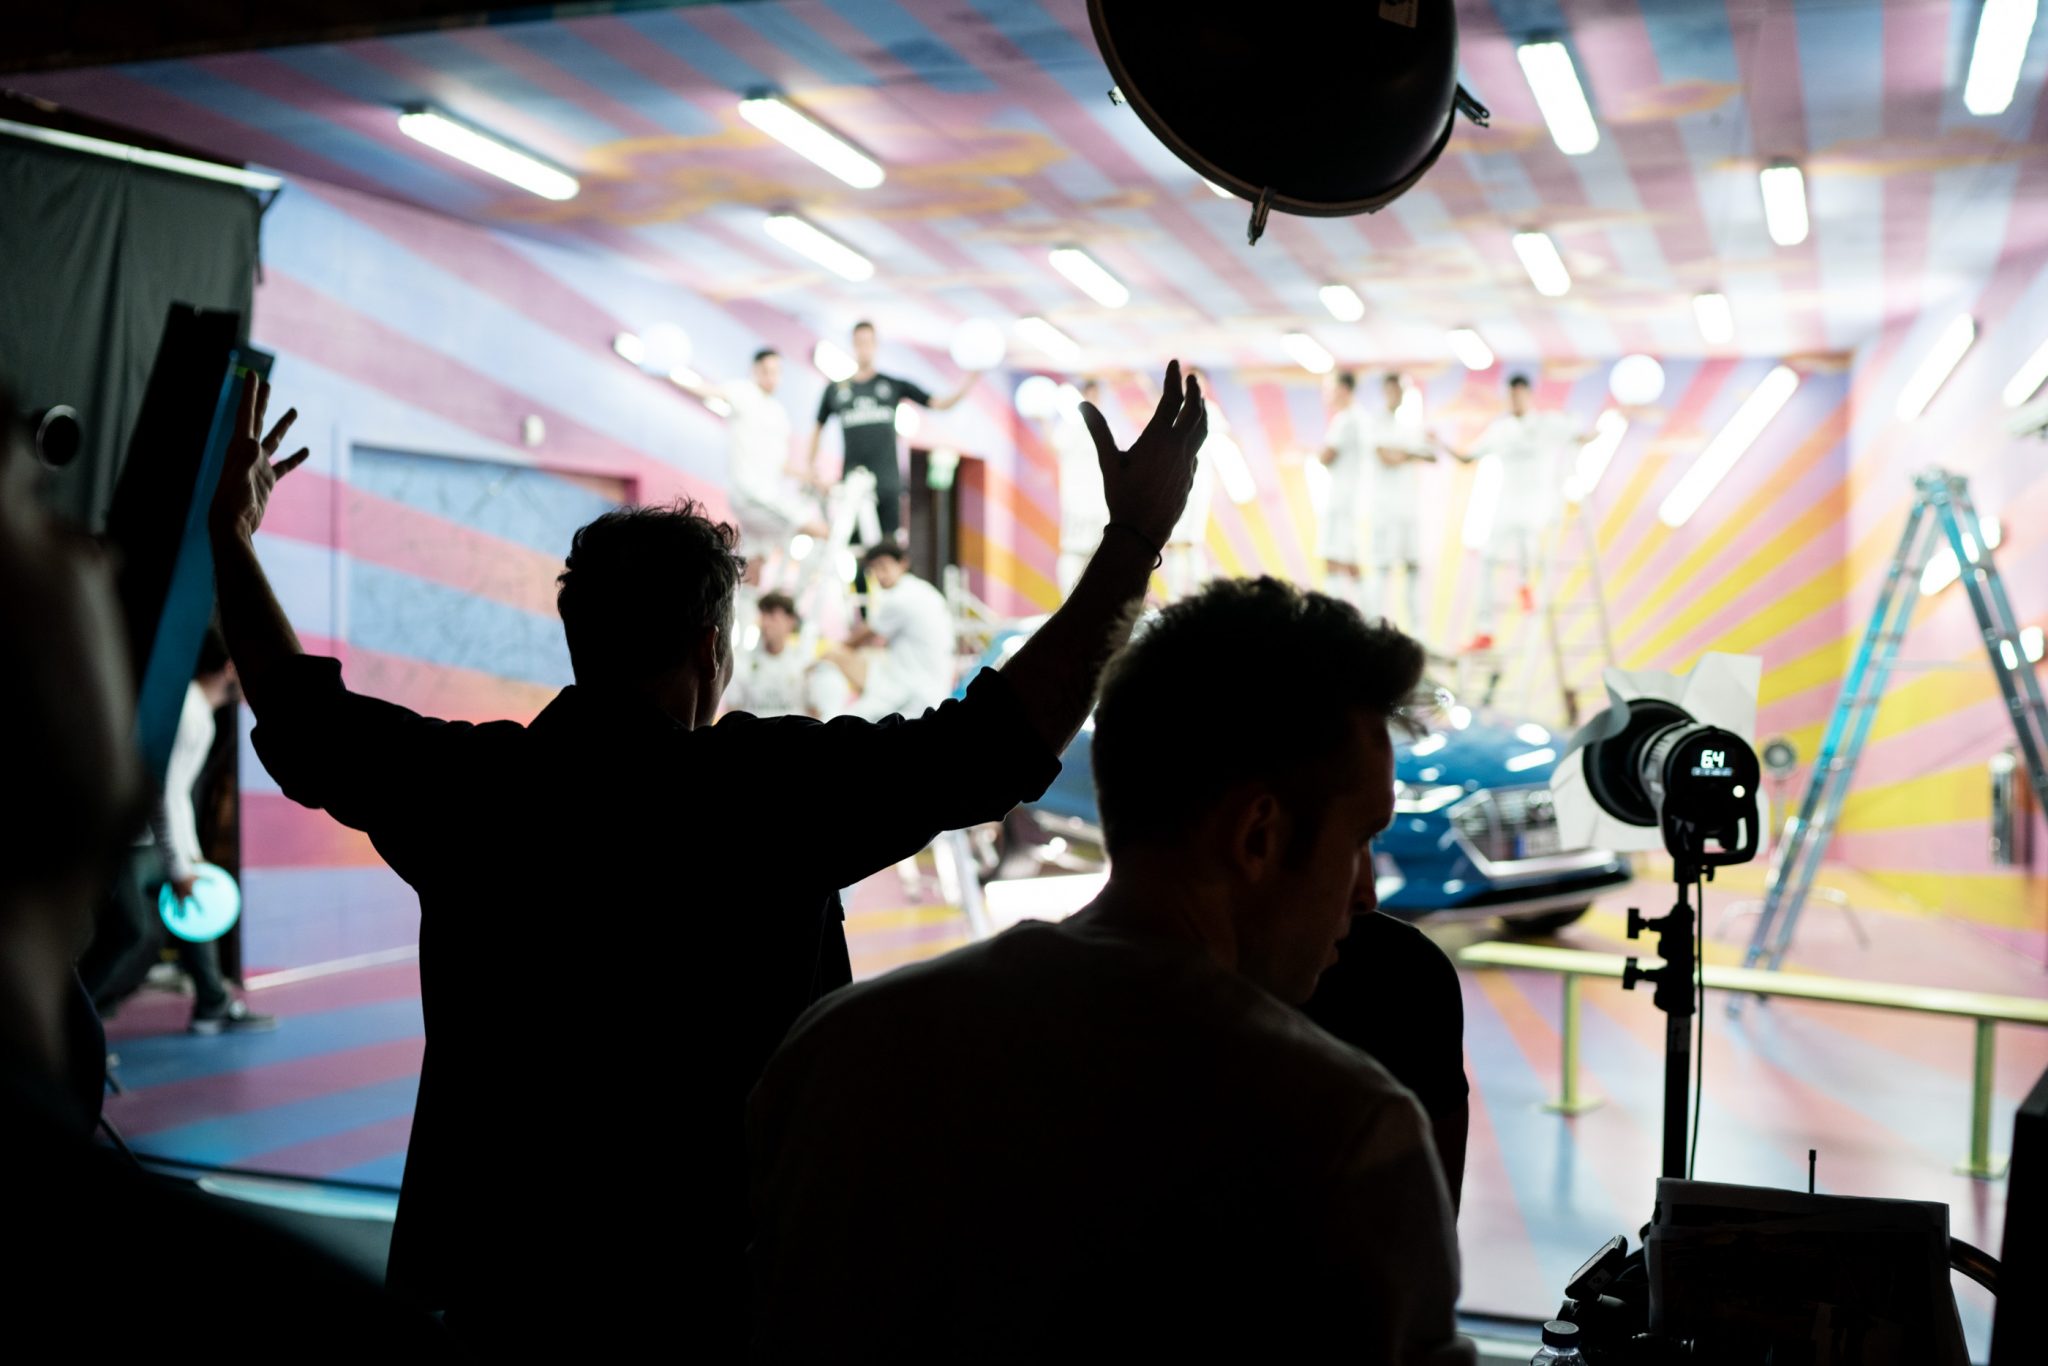 David LaChapelle | Audi x Real Madrid | Behind-the-scenes photographs from the Audi E-tron launch shoot in Madrid. | 15